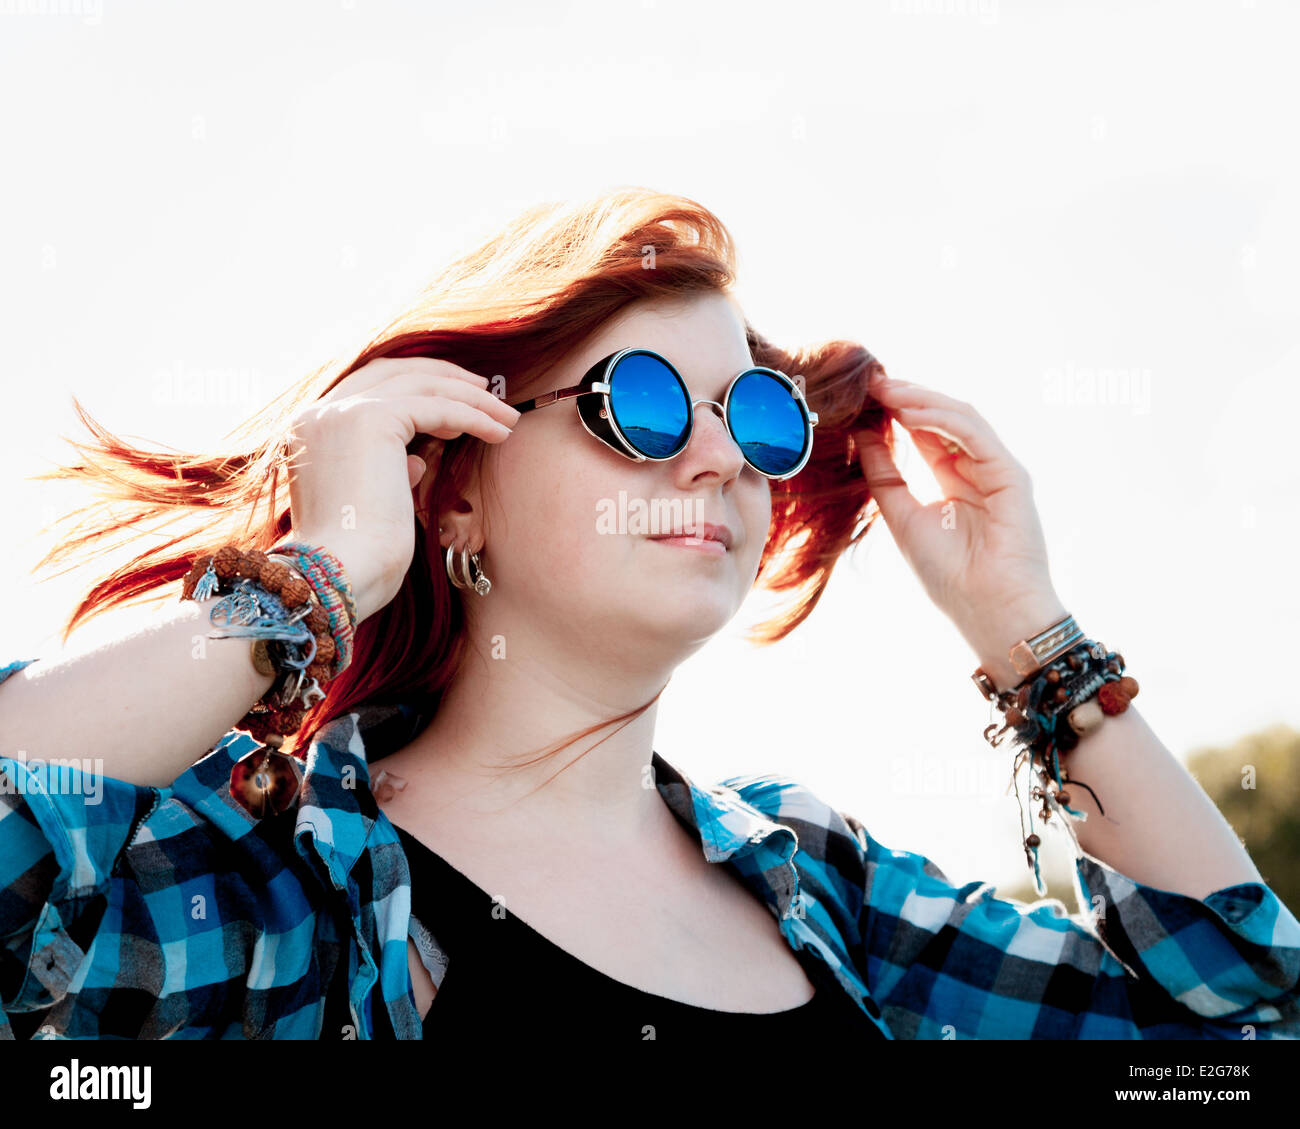 beautiful young red hair woman in sunglasses Stock Photo